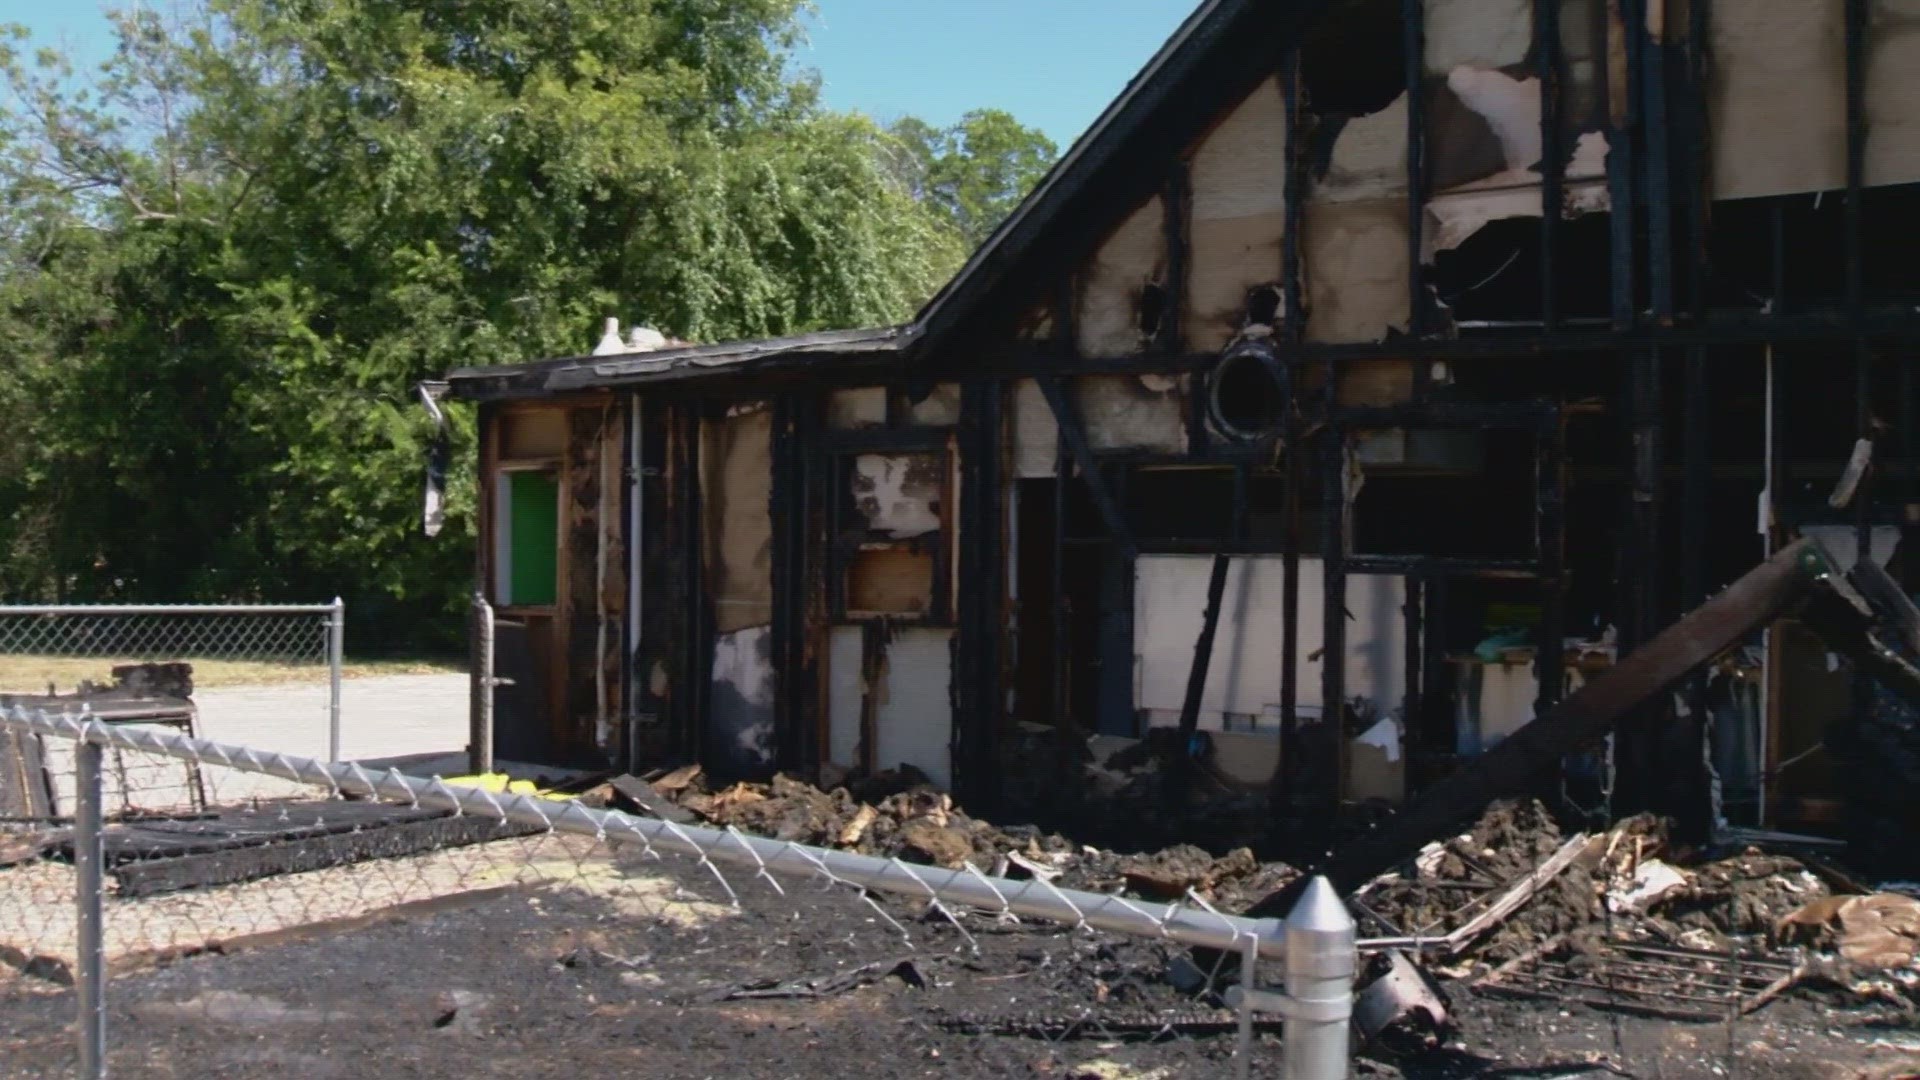 Christ Redeeming Community Church went up in flames late Sunday night. Fire investigators are working to determine the cause.